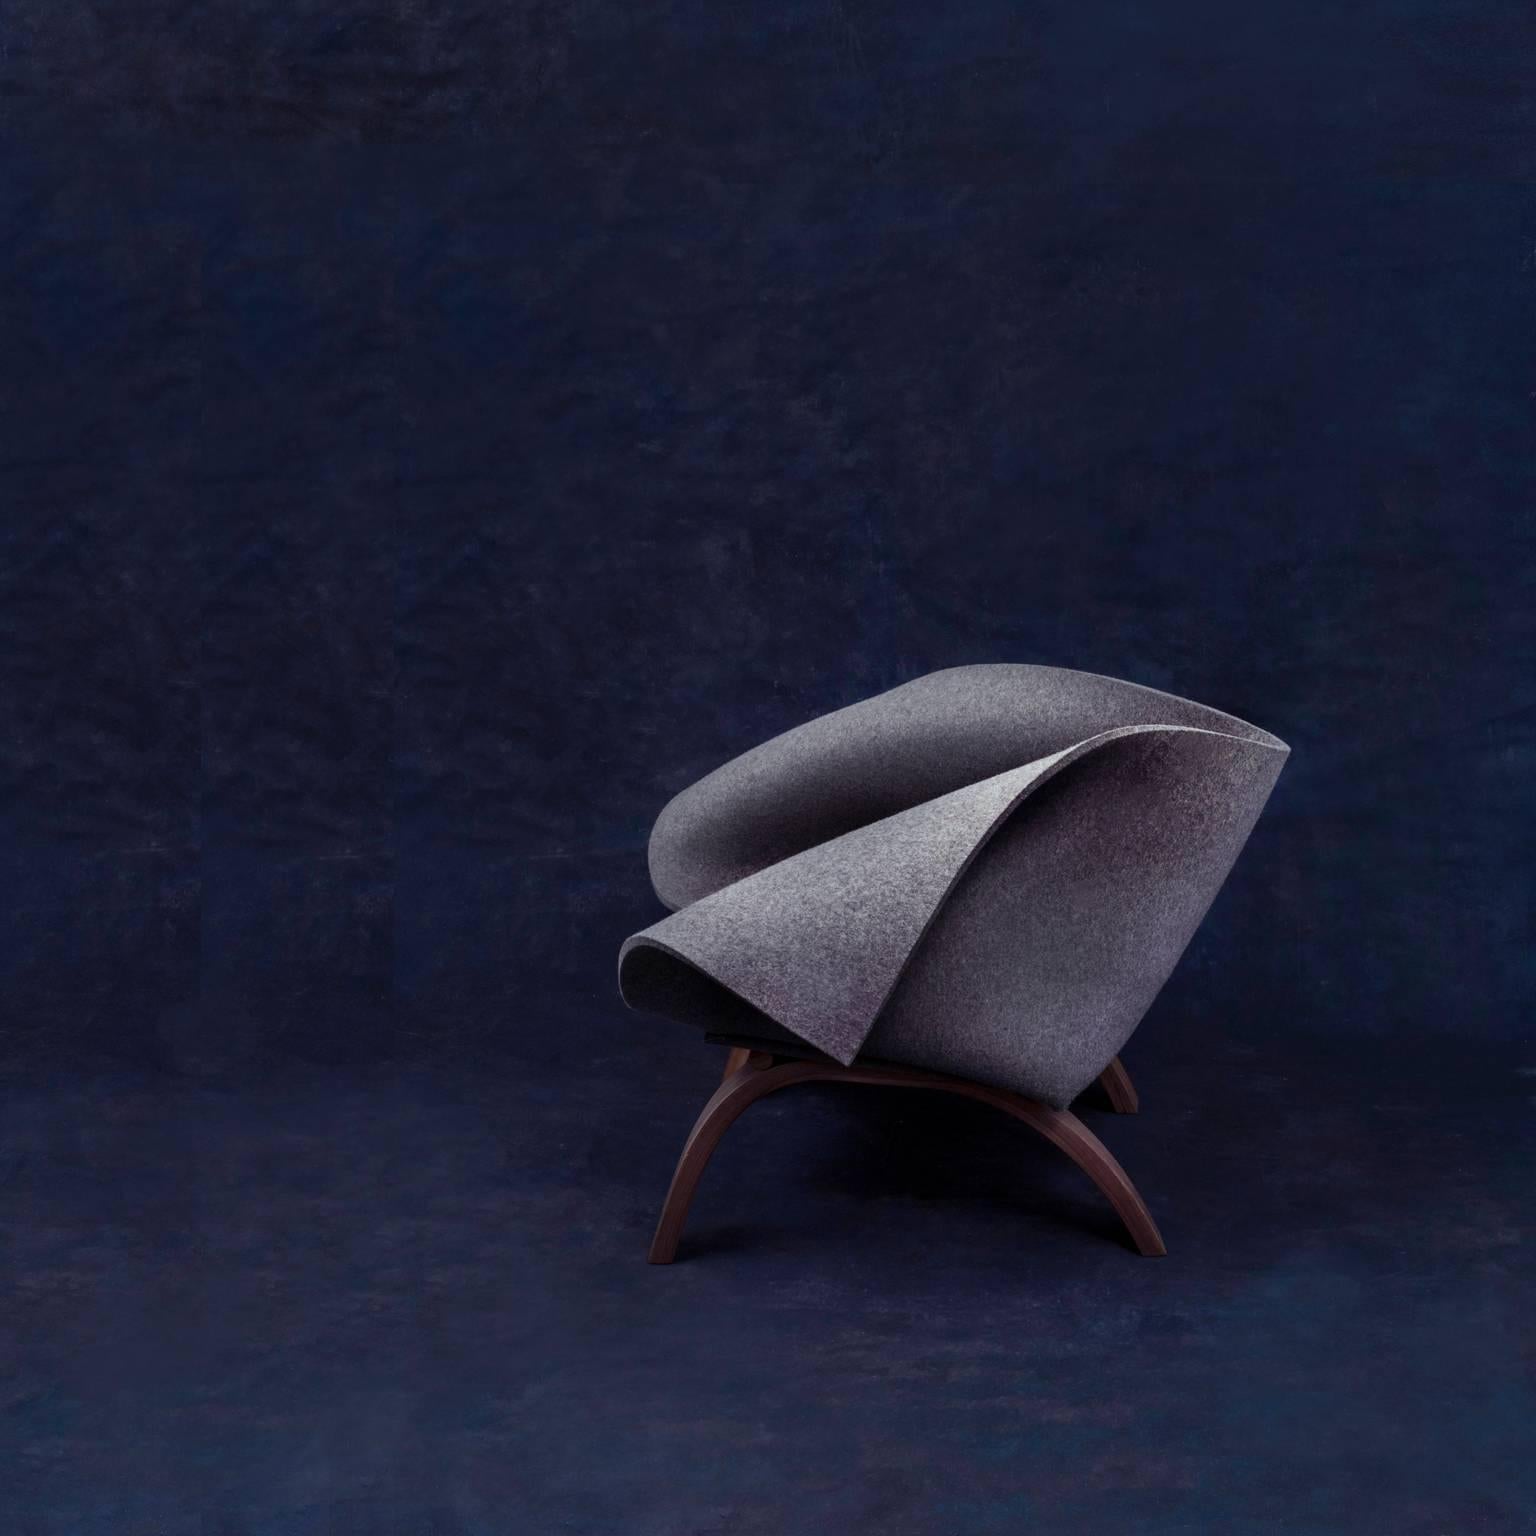 Babafelt is an easy chair made from thick natural wool felt. The felt sheet is cut and folded to make a cocoon-like space in which to sit, which responds to the occupants’ movements and hugs them as they lean back.
The wooden frame is made by